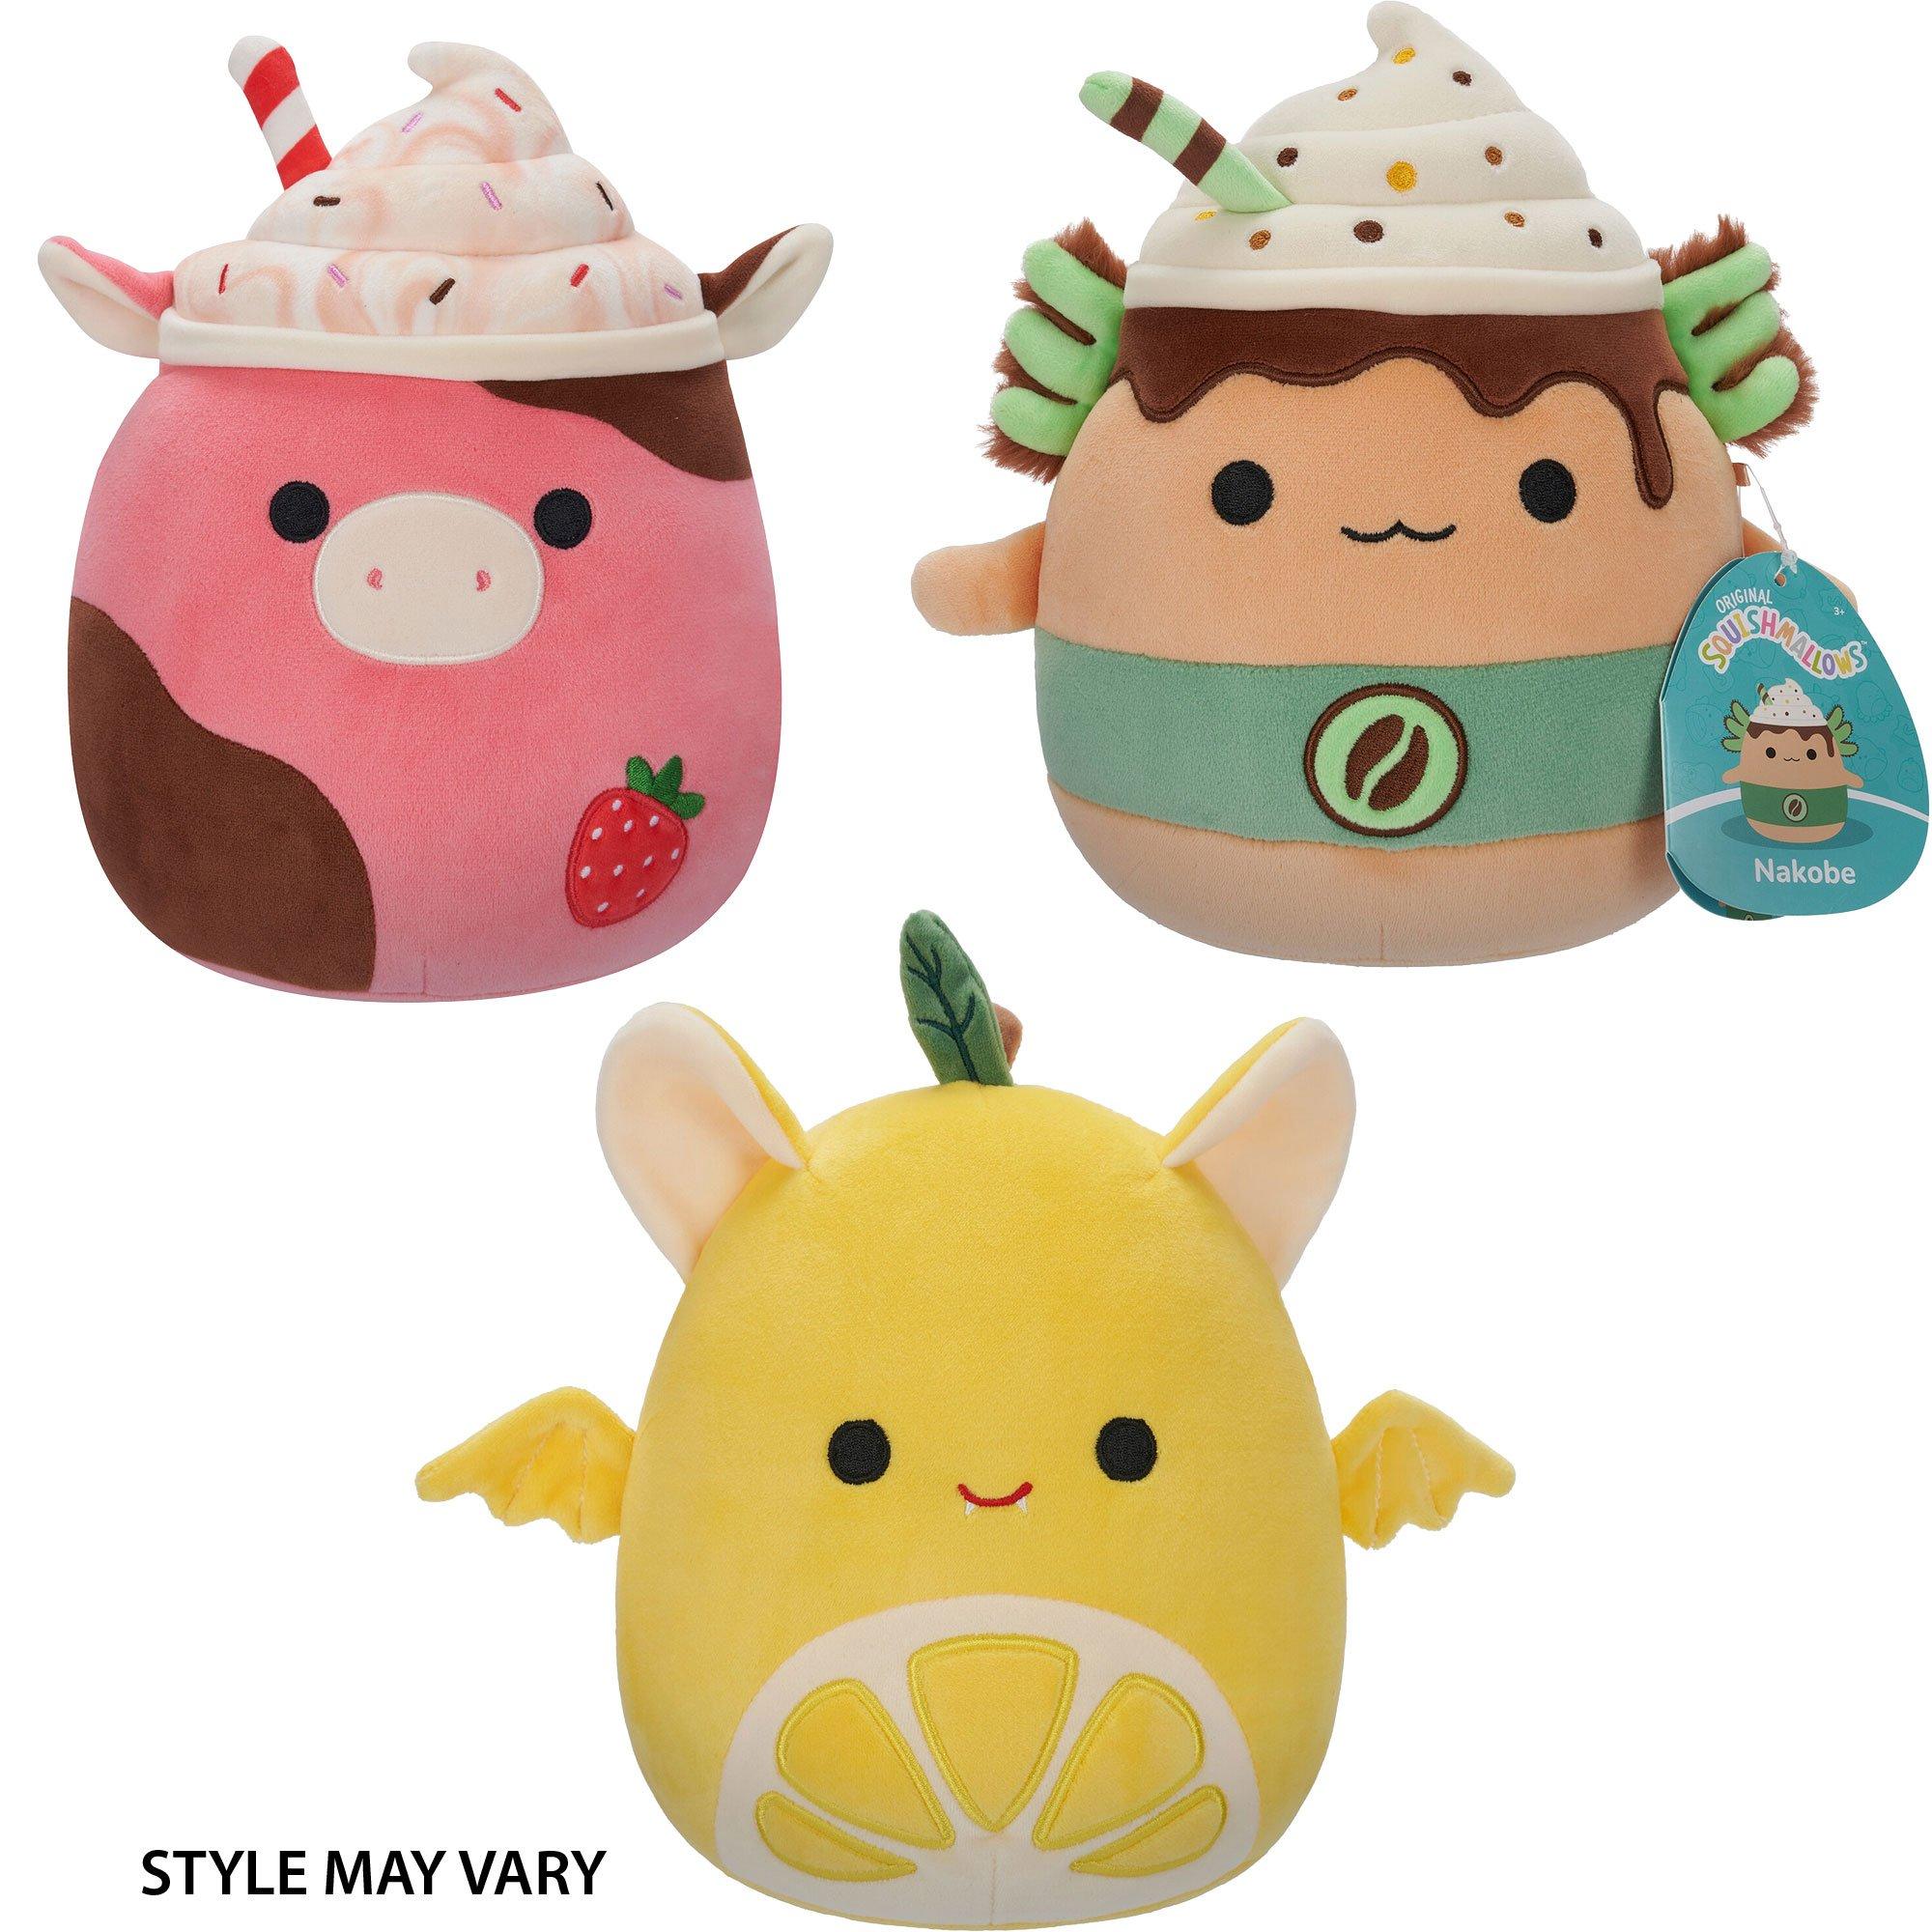 Squishmallows Hybrid Mystery Squad Pack, 8in